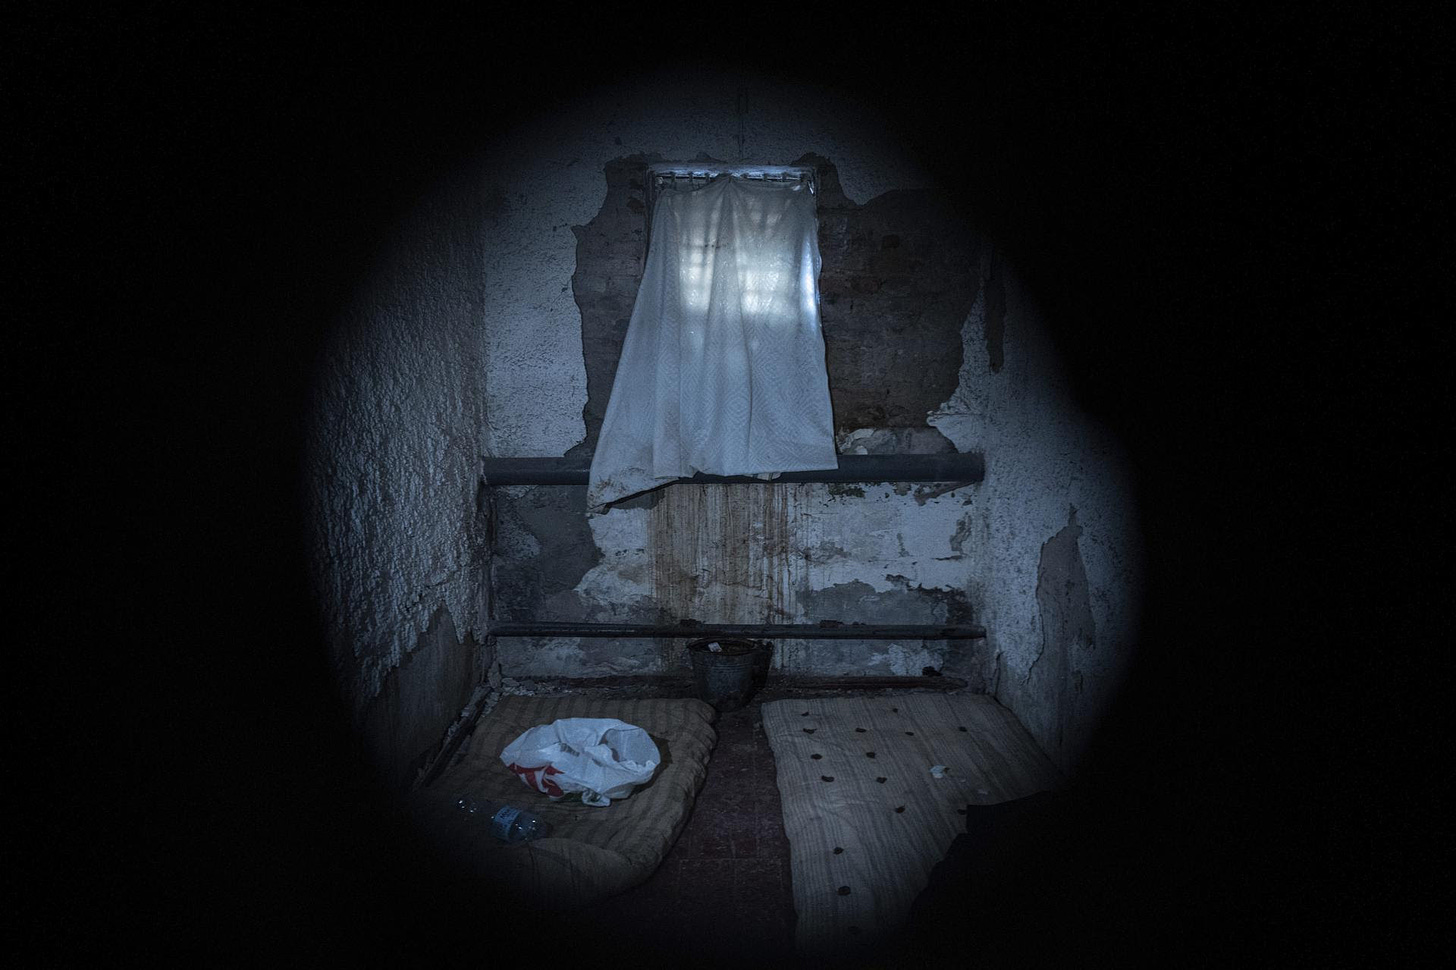 Seen through a peephole, a jail cell in Izium, Ukraine